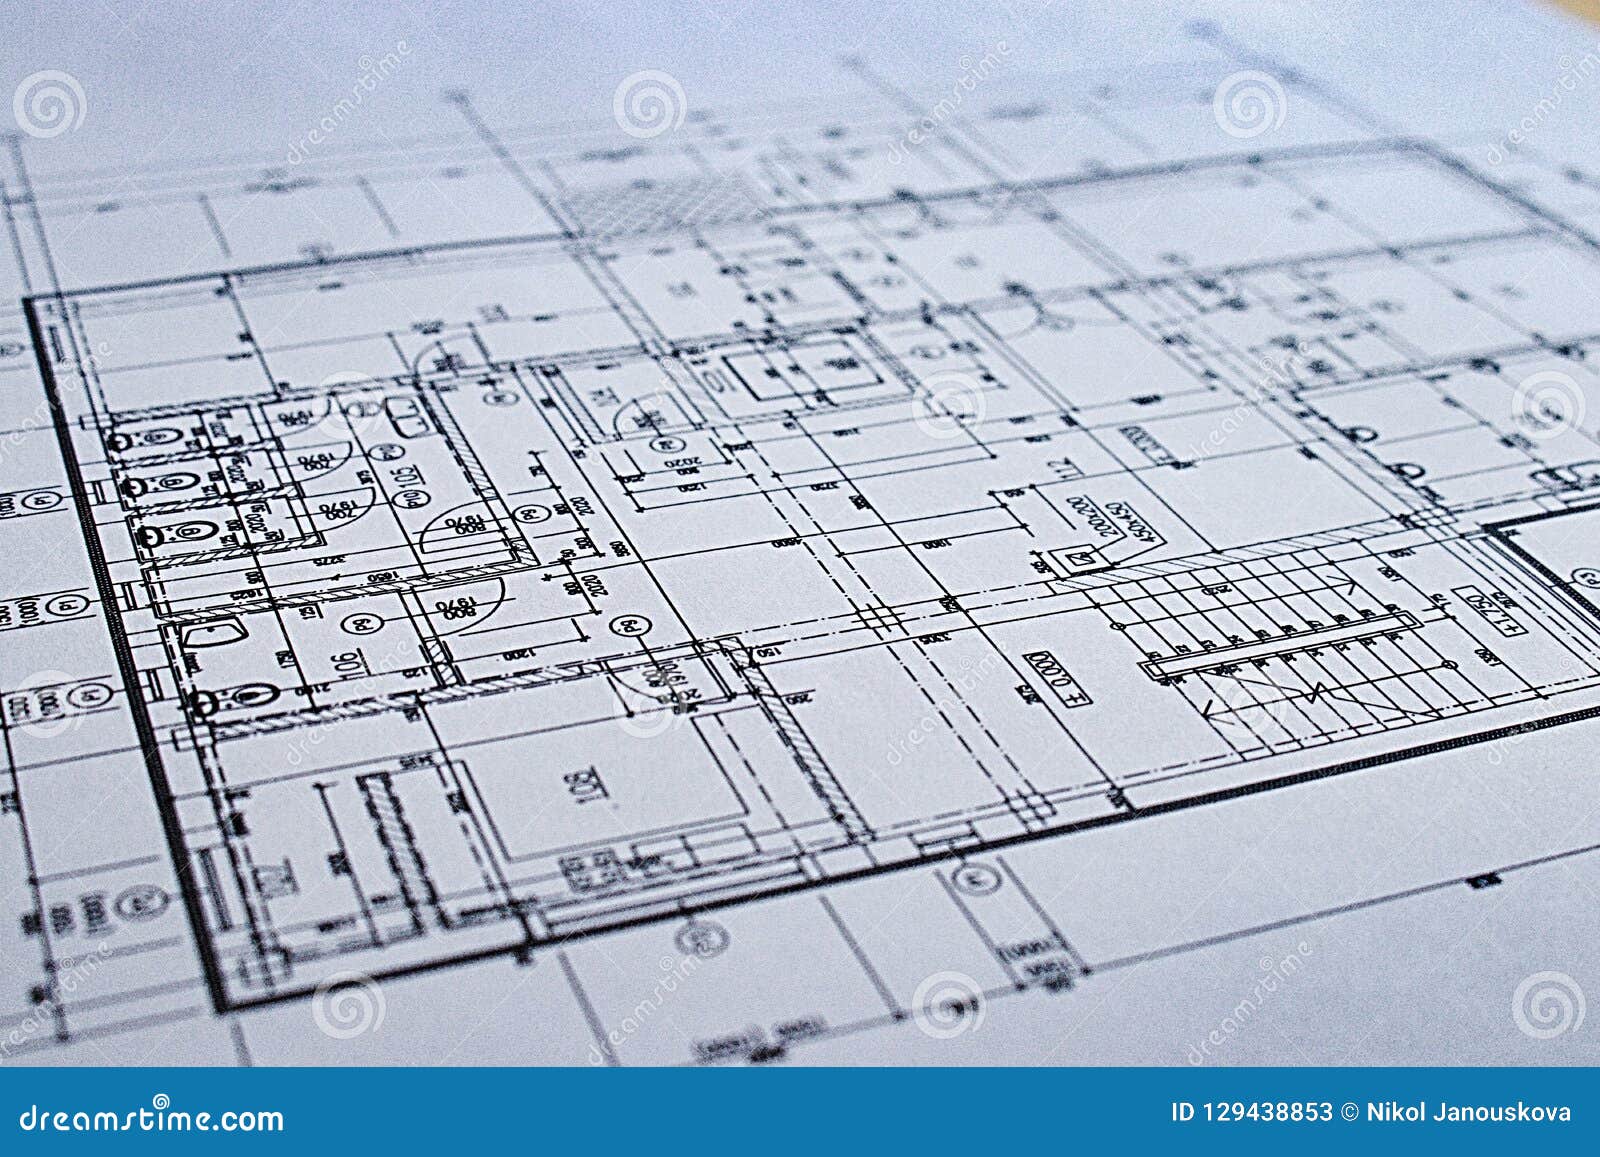 Arch And Ansi Drawings Printing Online Blueprints Printing